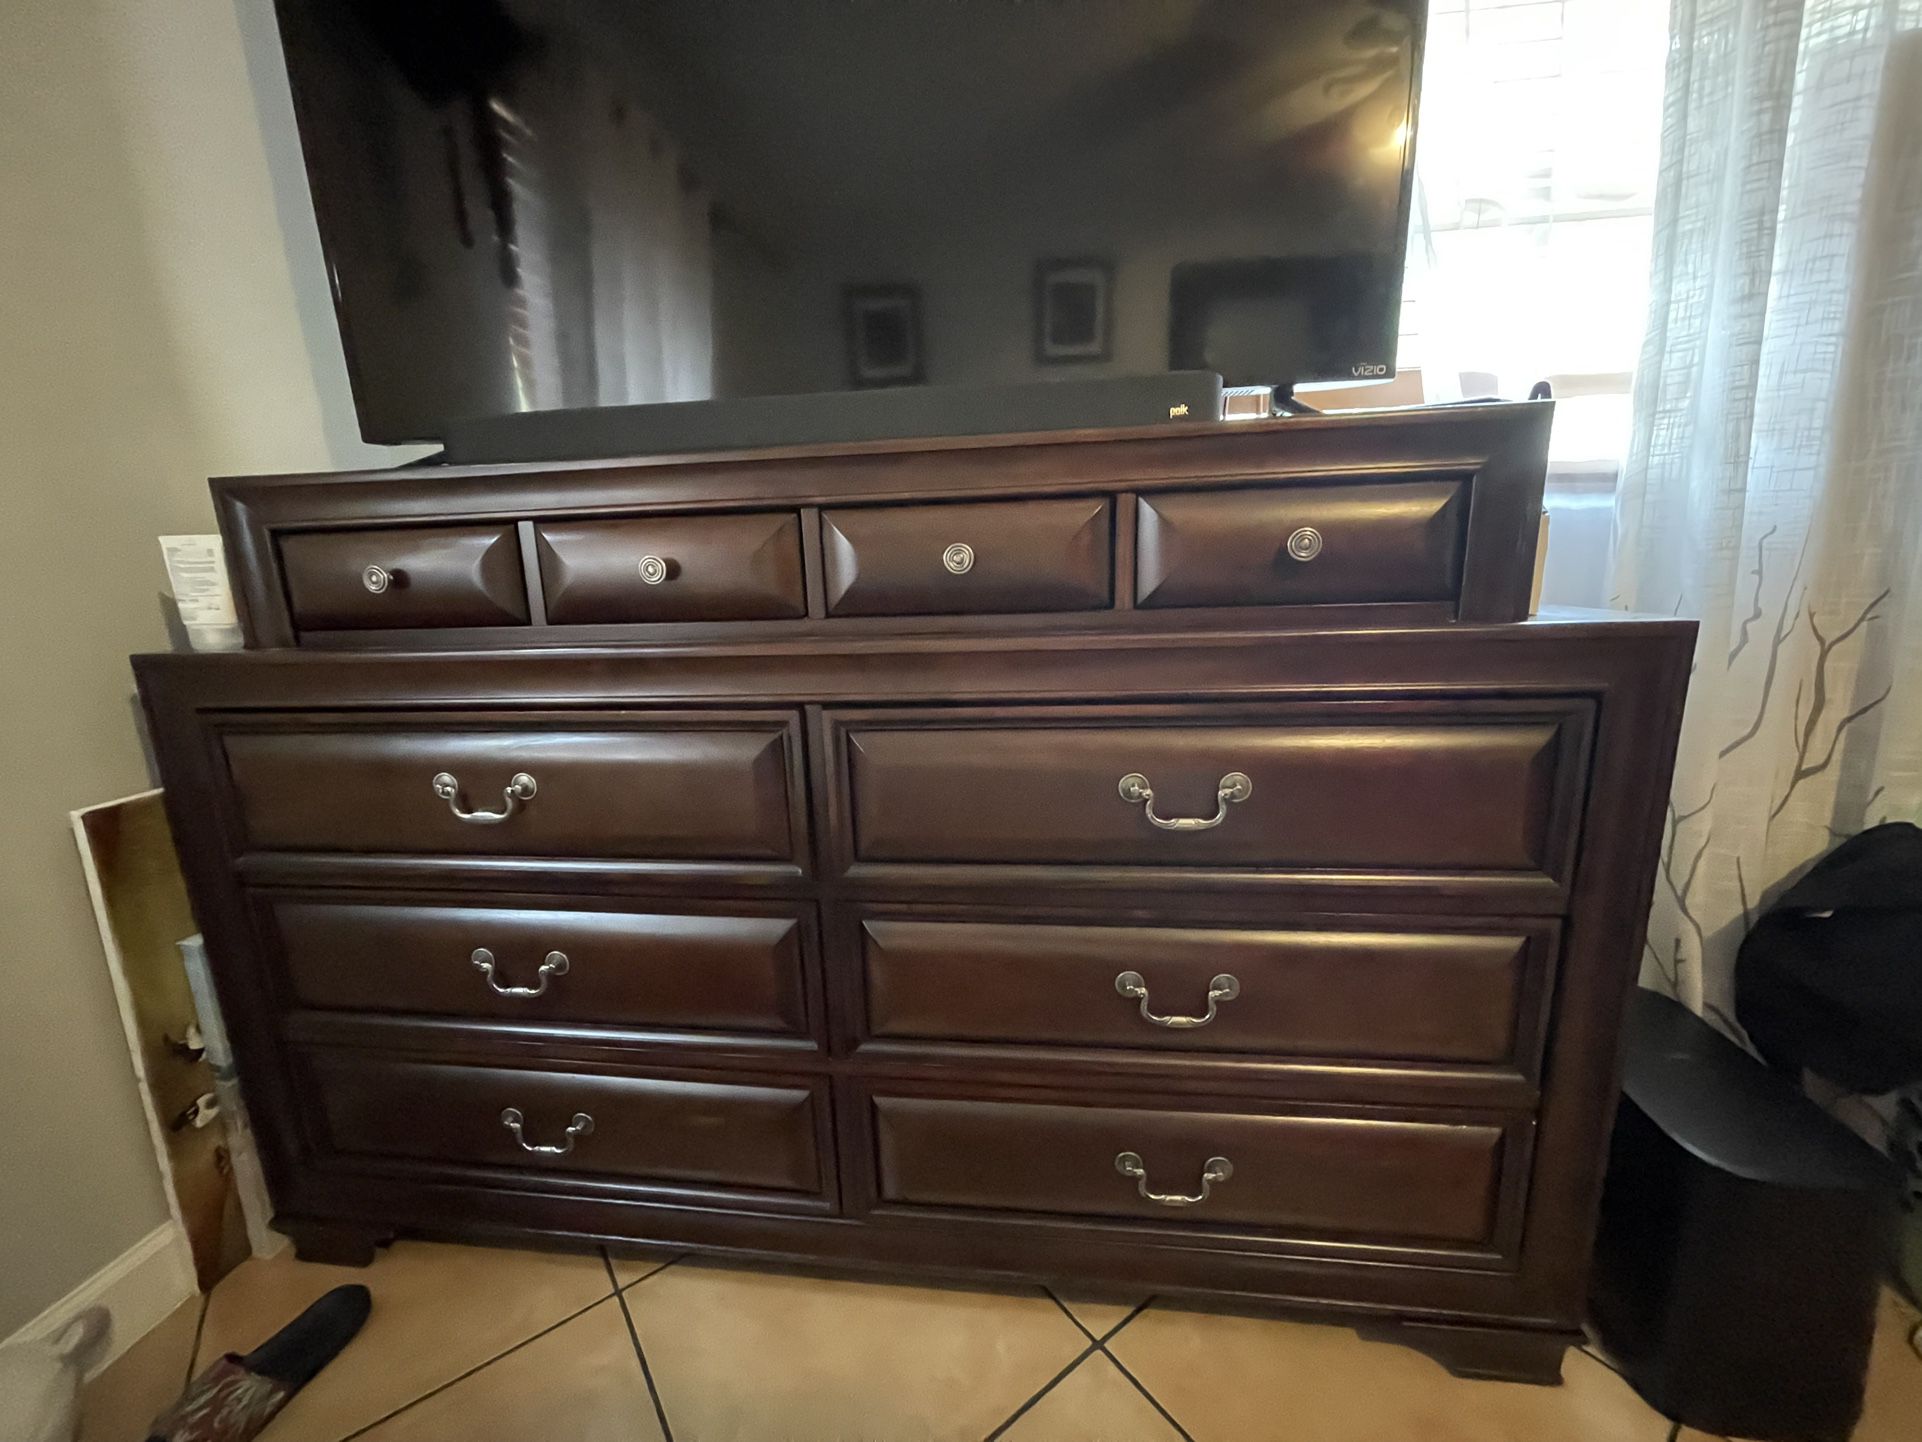 Chest For Sale Moving And No Longer Need